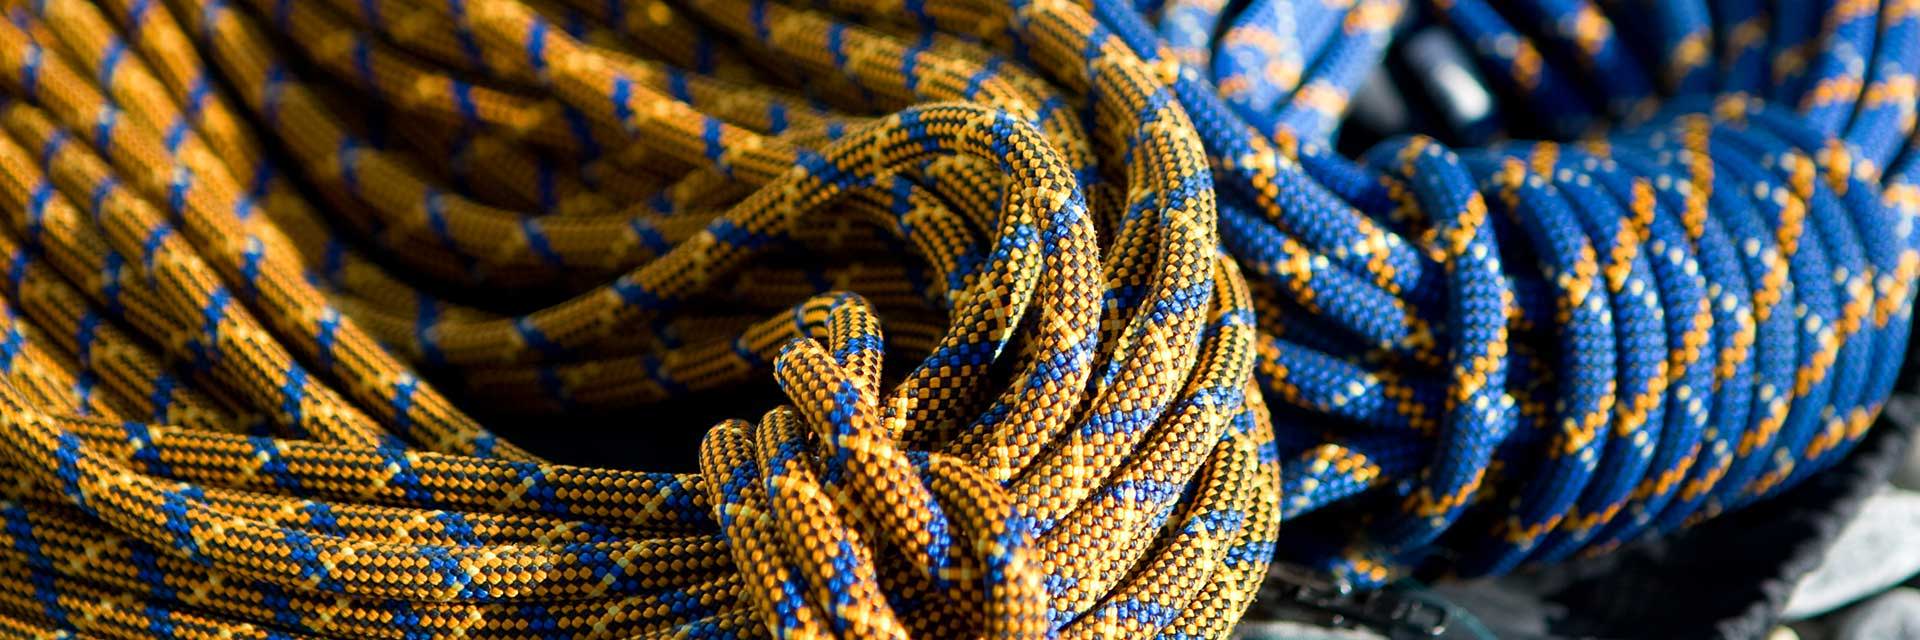 Pile of ropes